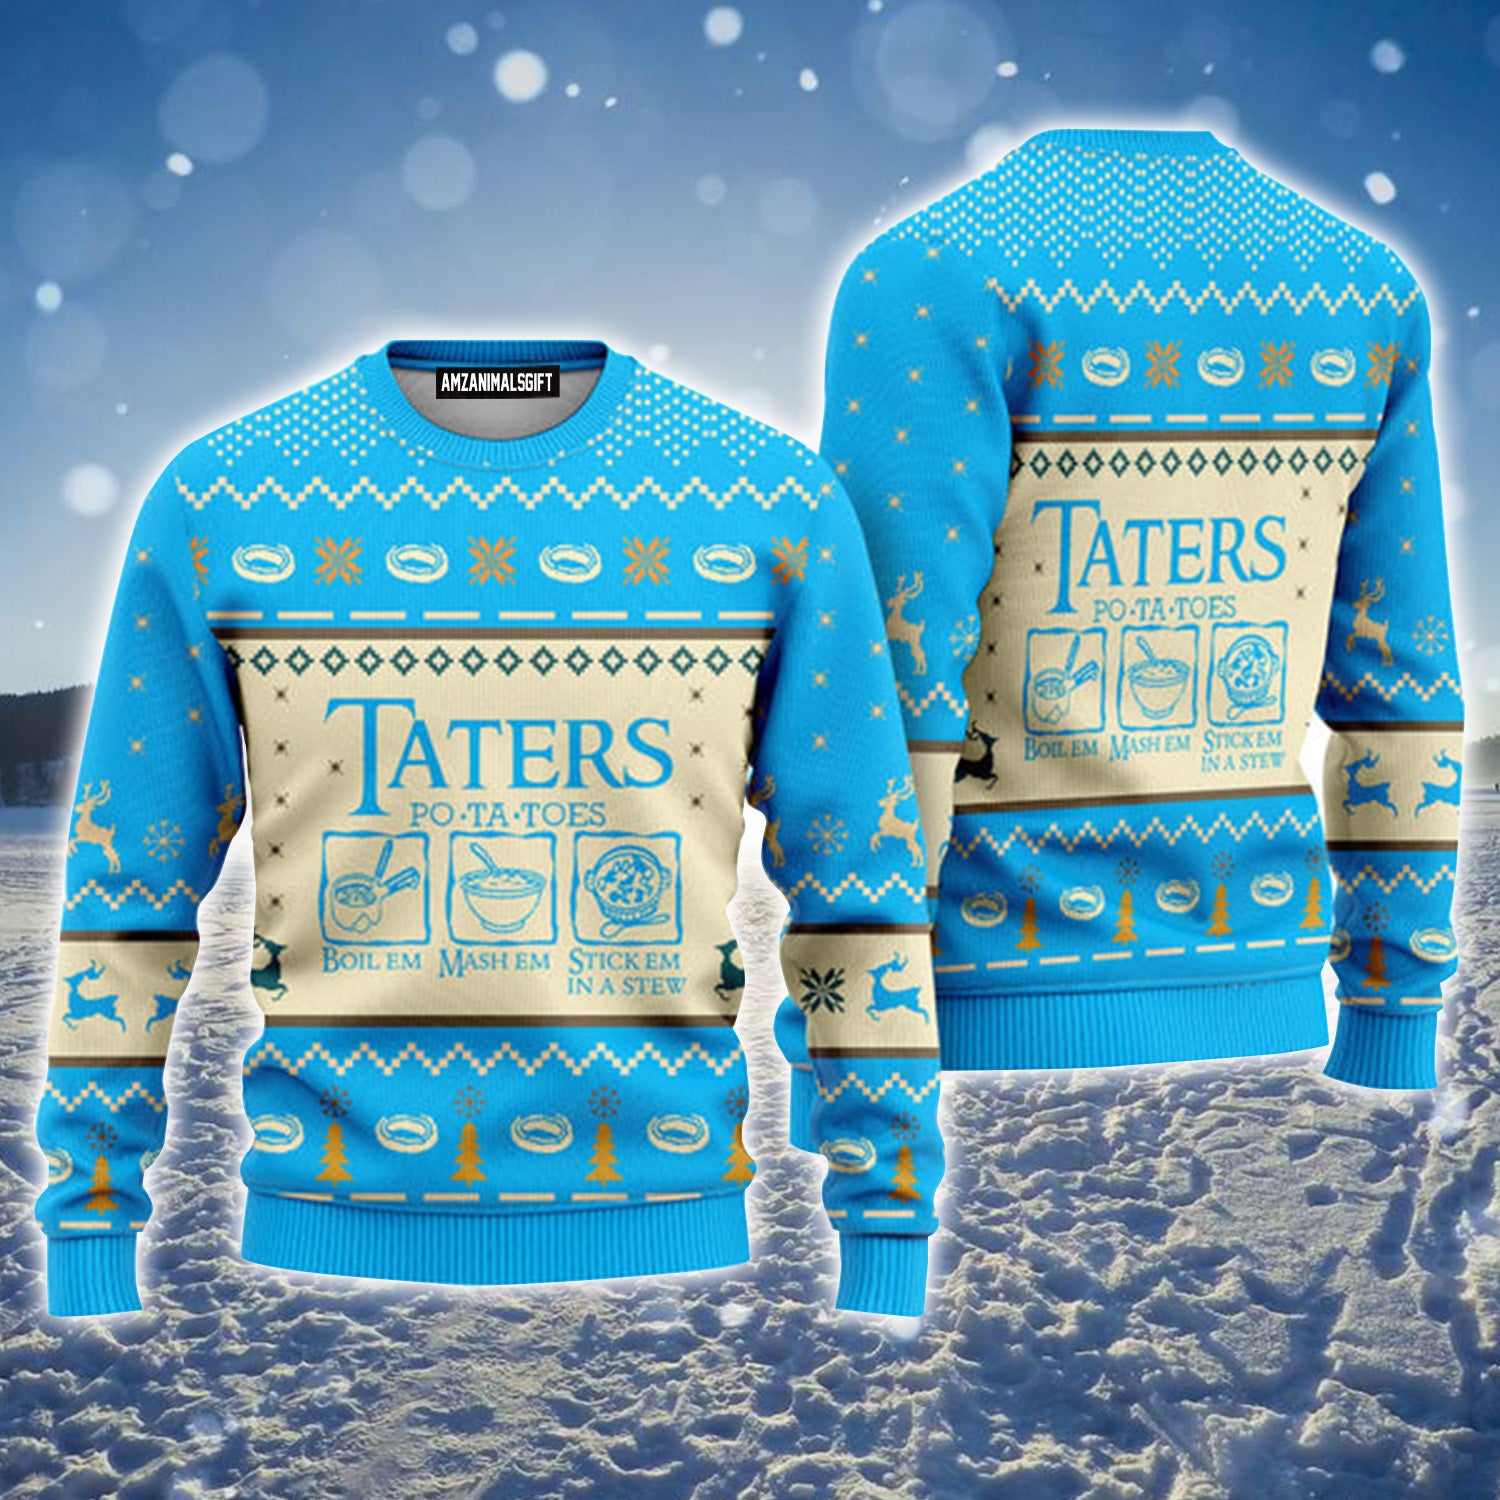 LOTR Potatoes Taters Light Blue Urly Christmas Sweater, Christmas Sweater For Men & Women - Perfect Gift For Christmas, Family, Friends